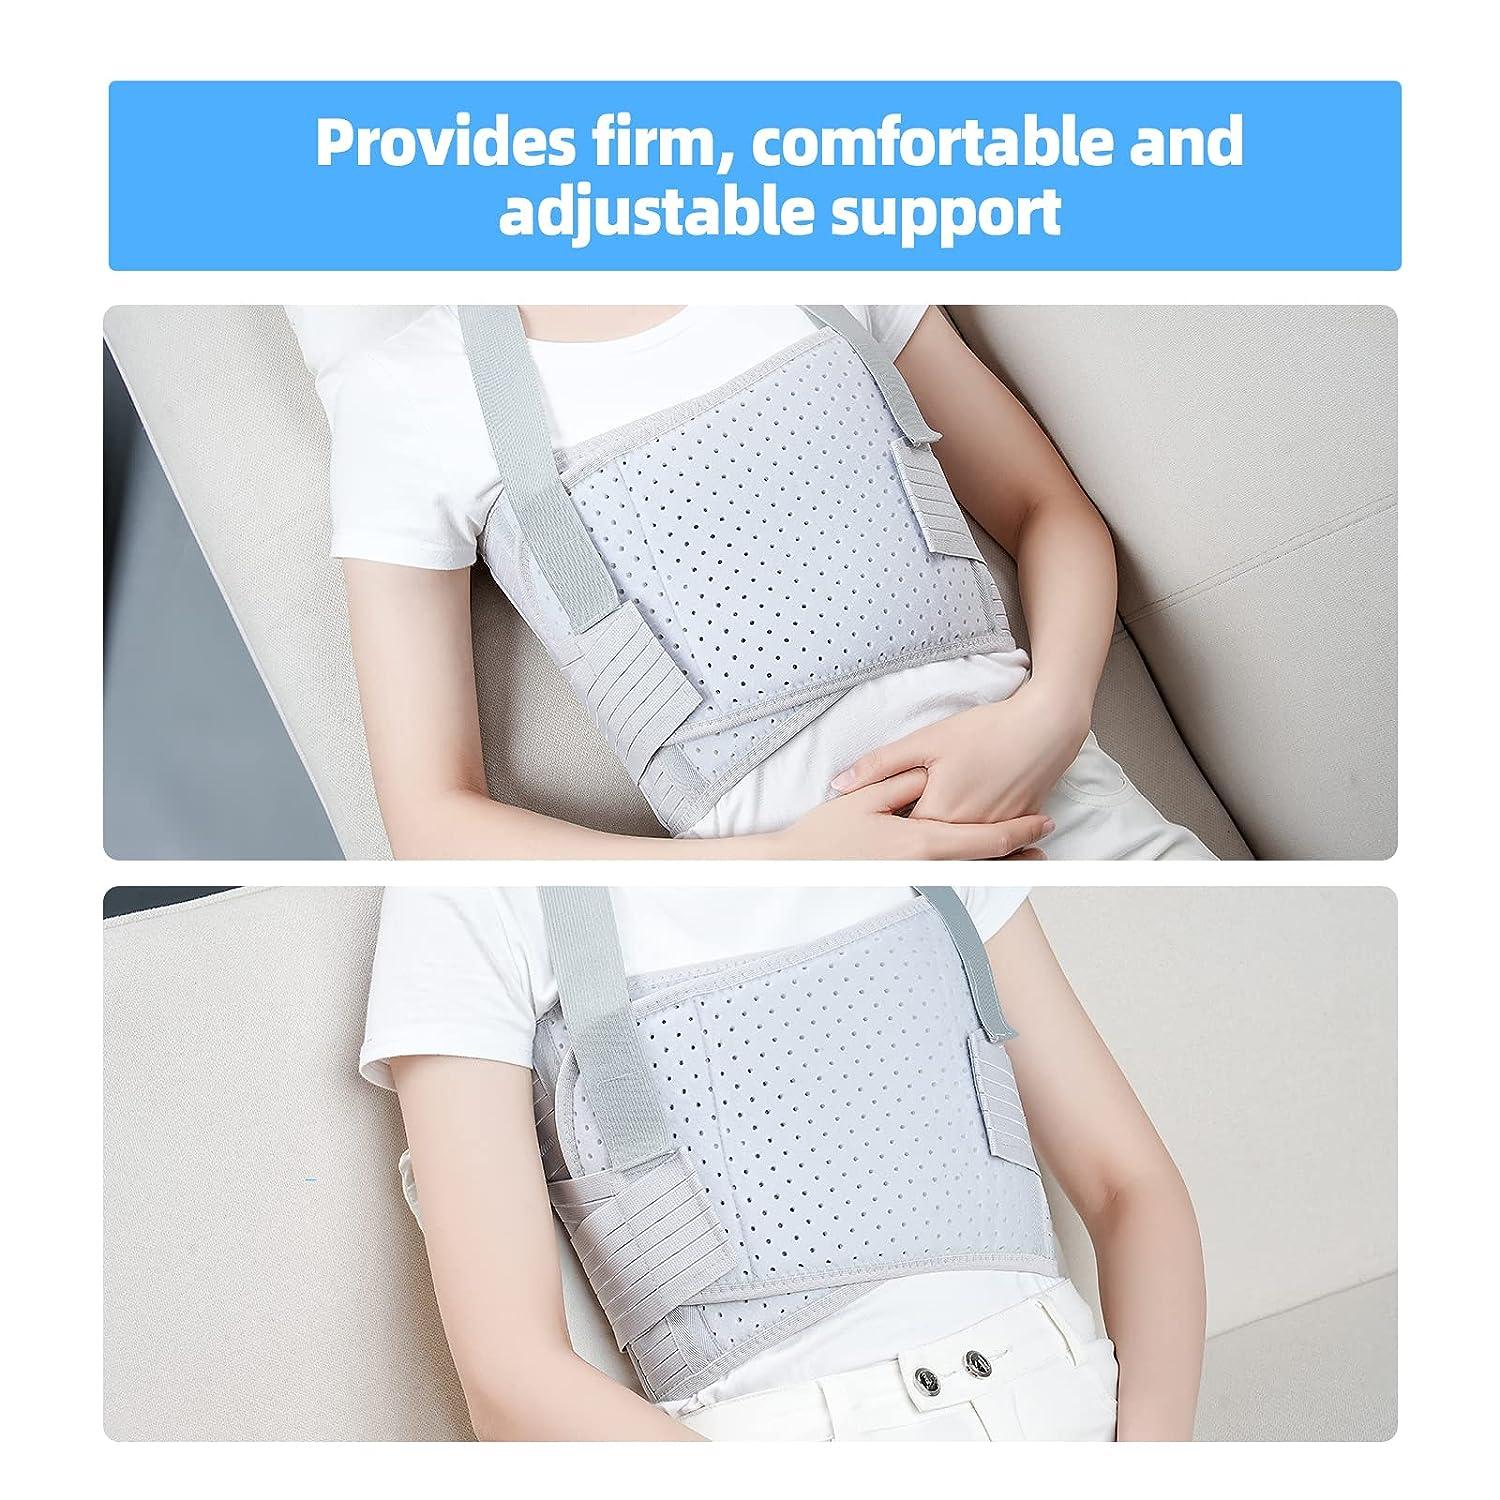 Solmyr Rib Injury Belt Chest Binder, Chest Brace Chest Compression Suppor  Rib Bandage Wrap for Sternum Injuries, Sore or Bruised Ribs Support,  Dislocated Ribs Protection, Pulled Muscle Pain - Yahoo Shopping